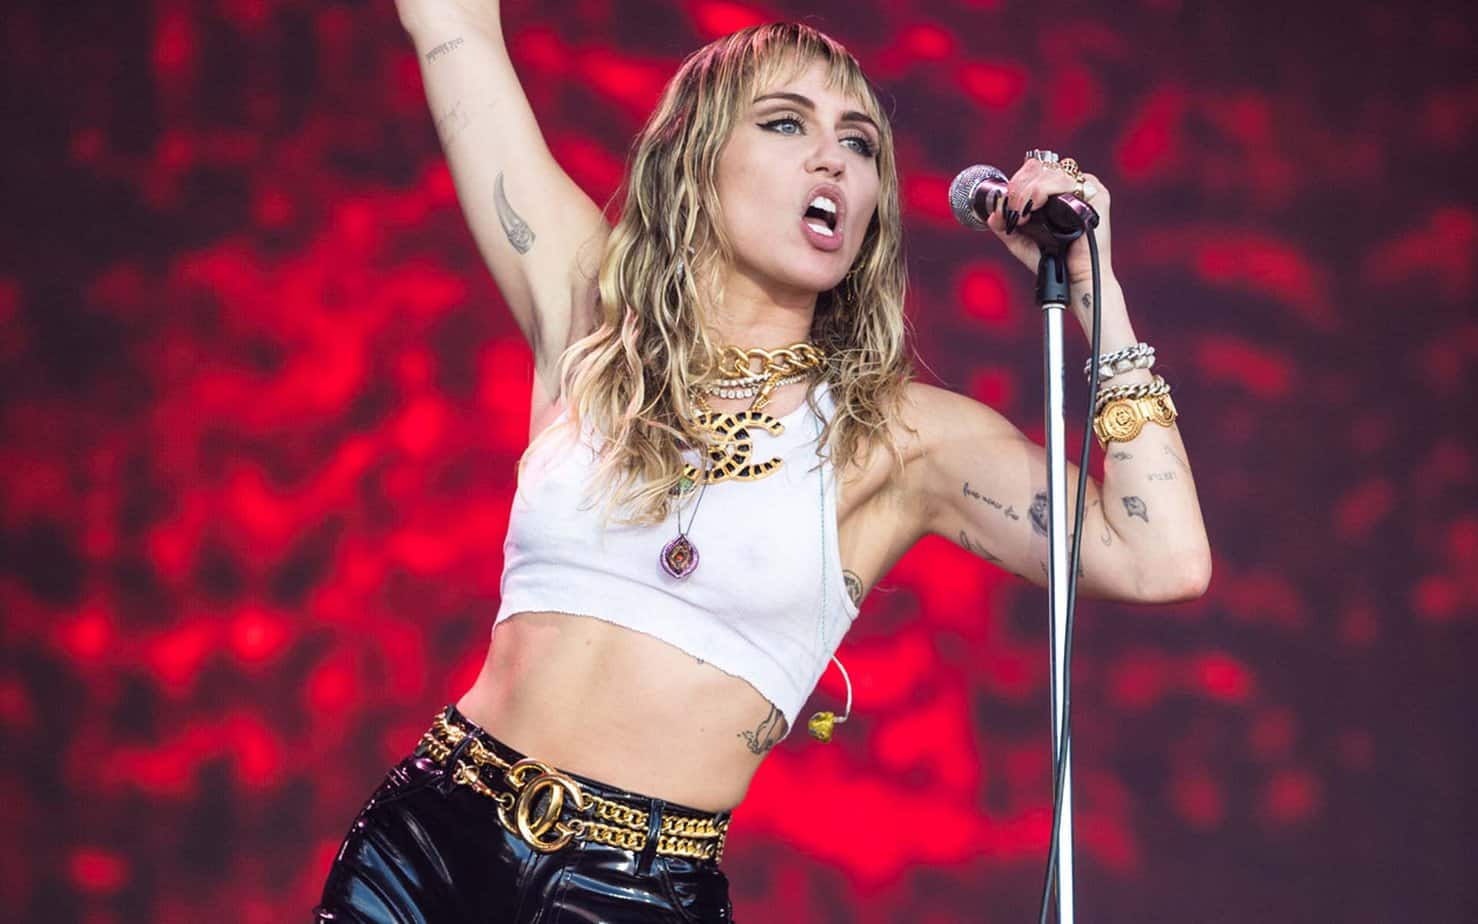 Coronavirus: Miley Cyrus Pulls Out of Australian Bushfire Relief Show, Event Cancelled